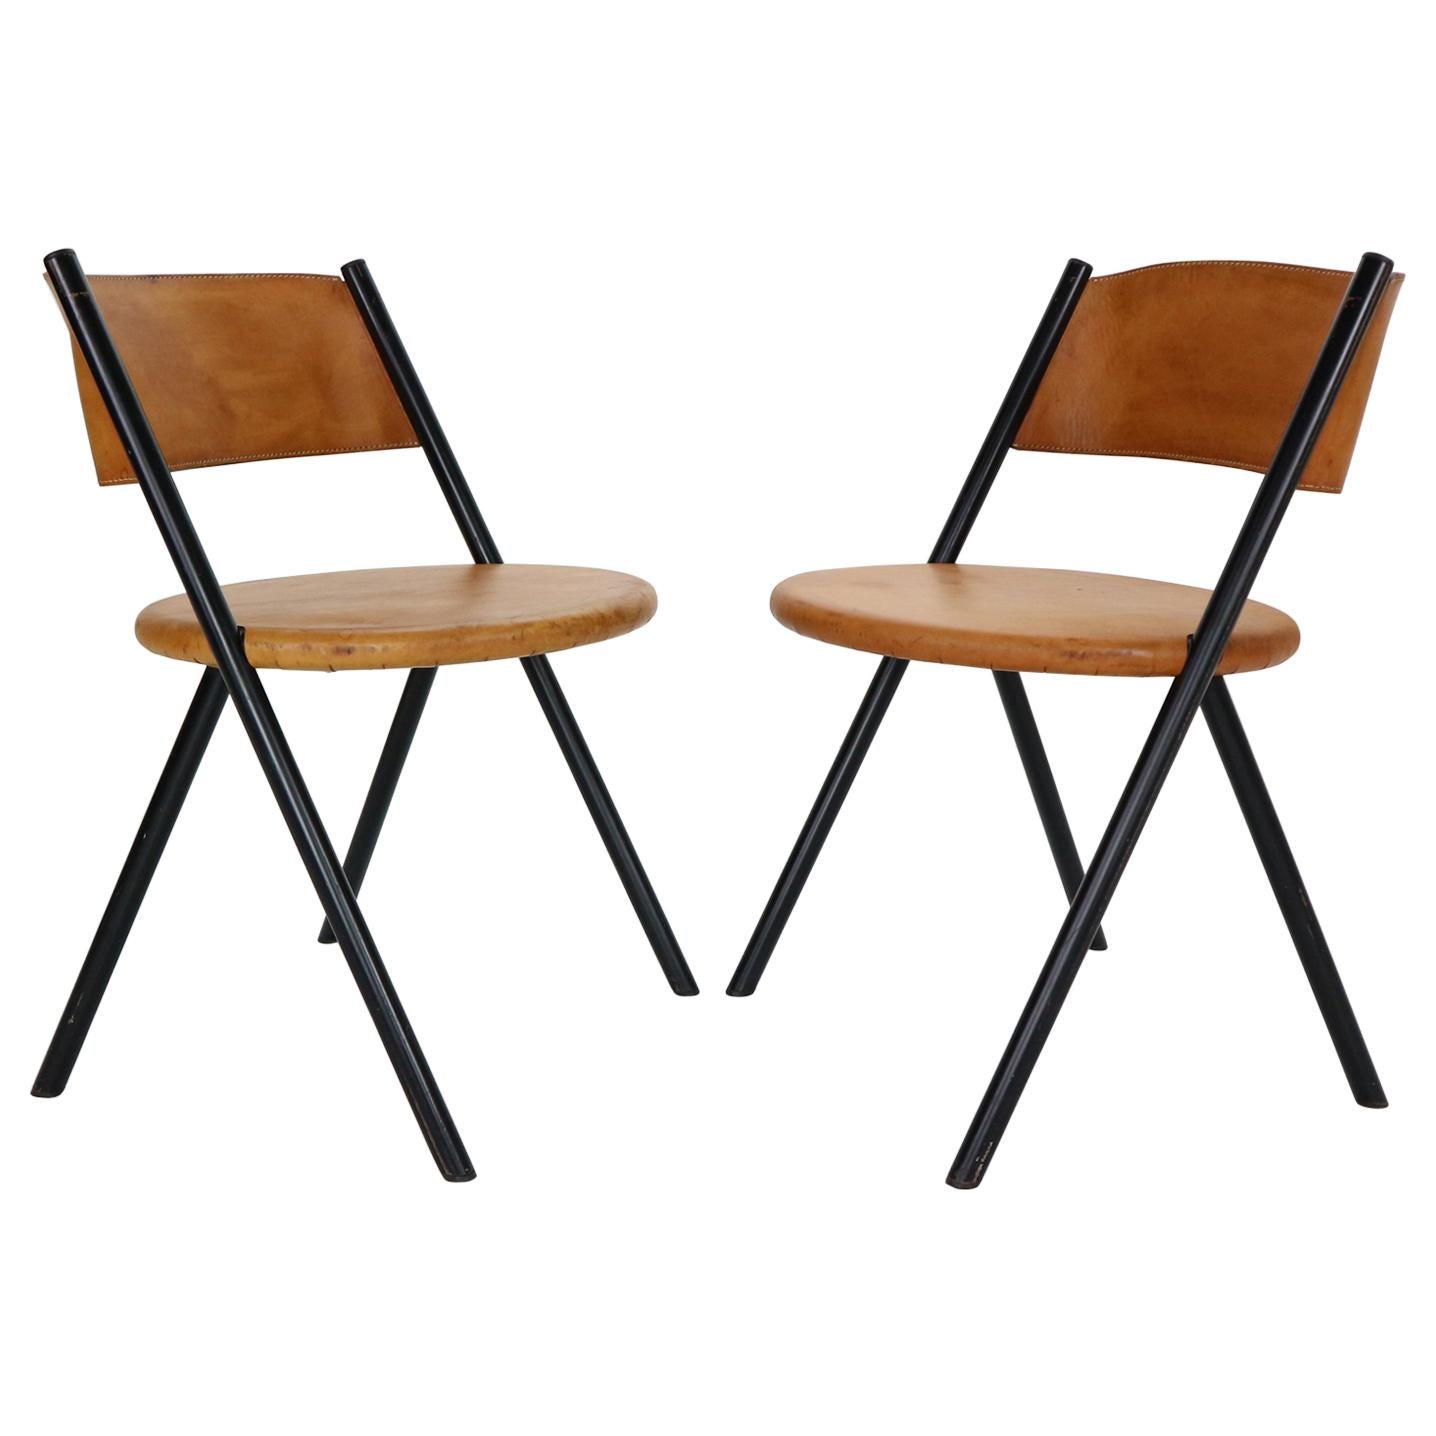 Mid-Century Modern Set of 2 Cognac Leather Chairs, 1970s, Italy